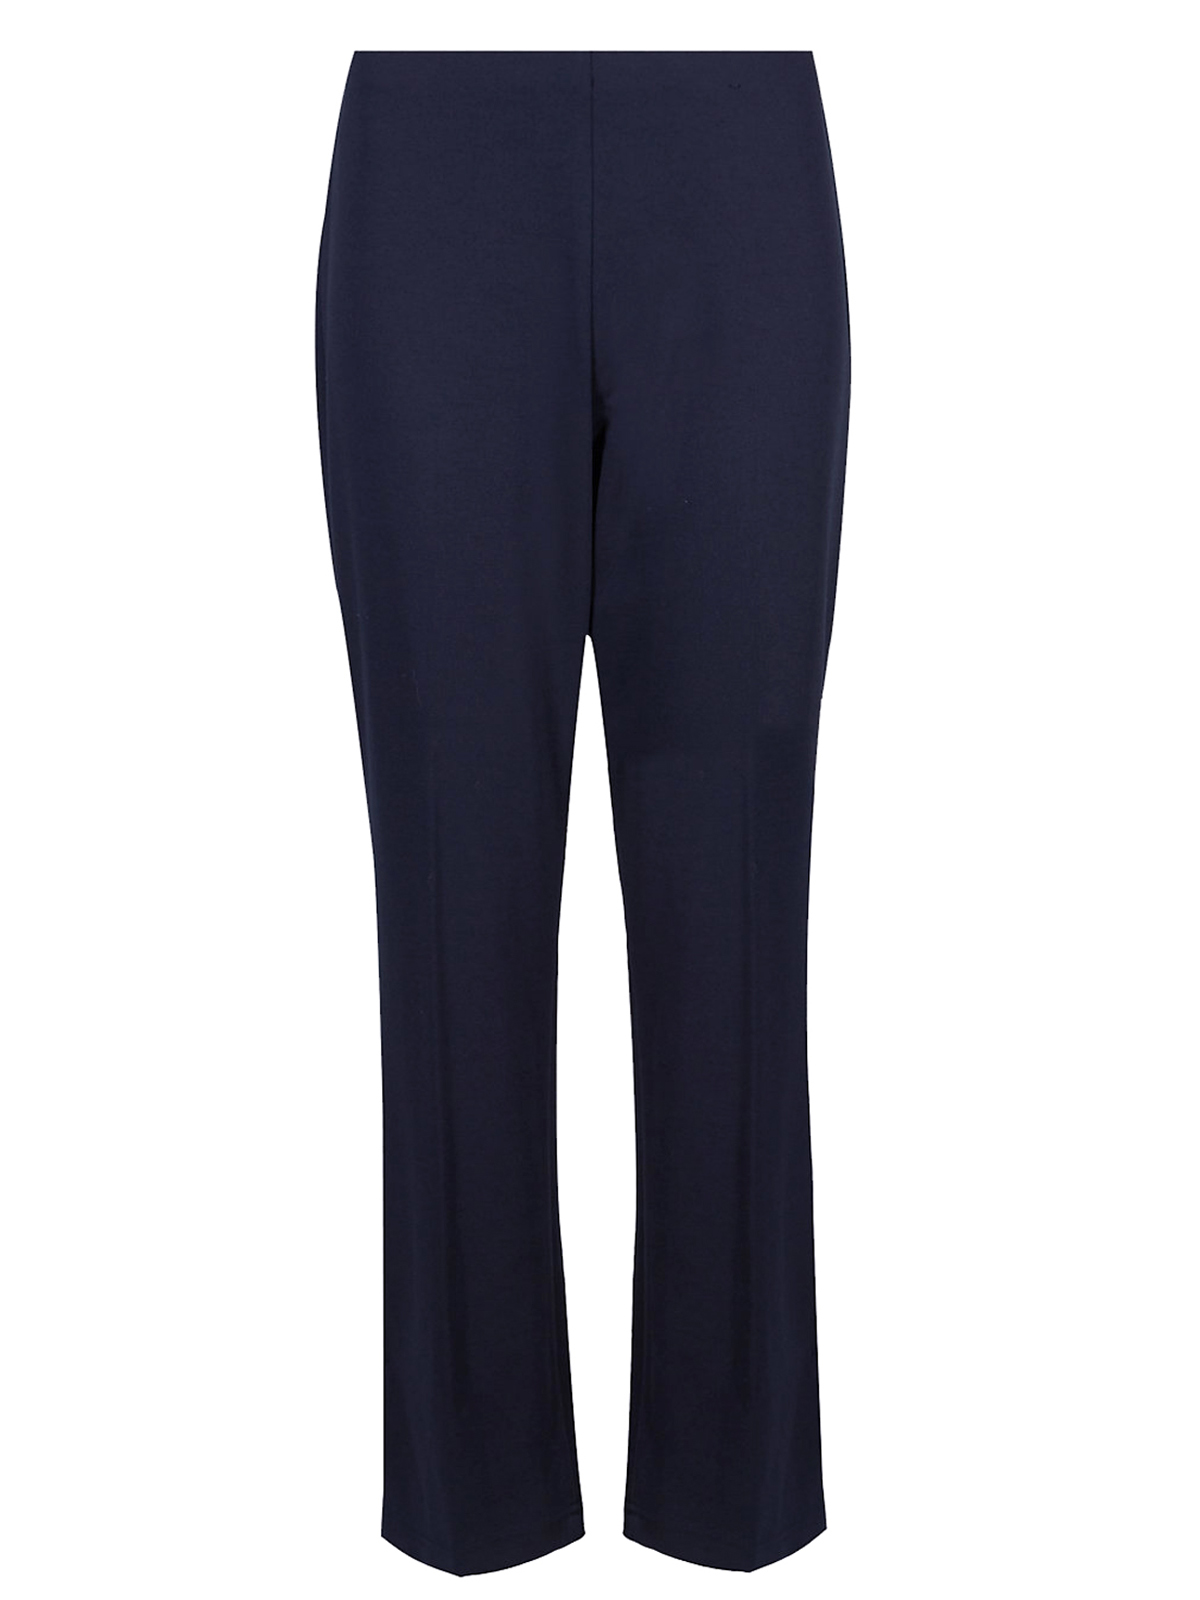 Marks and Spencer - - M&5 ASSORTED Ladies Trousers - Size 8 to 16